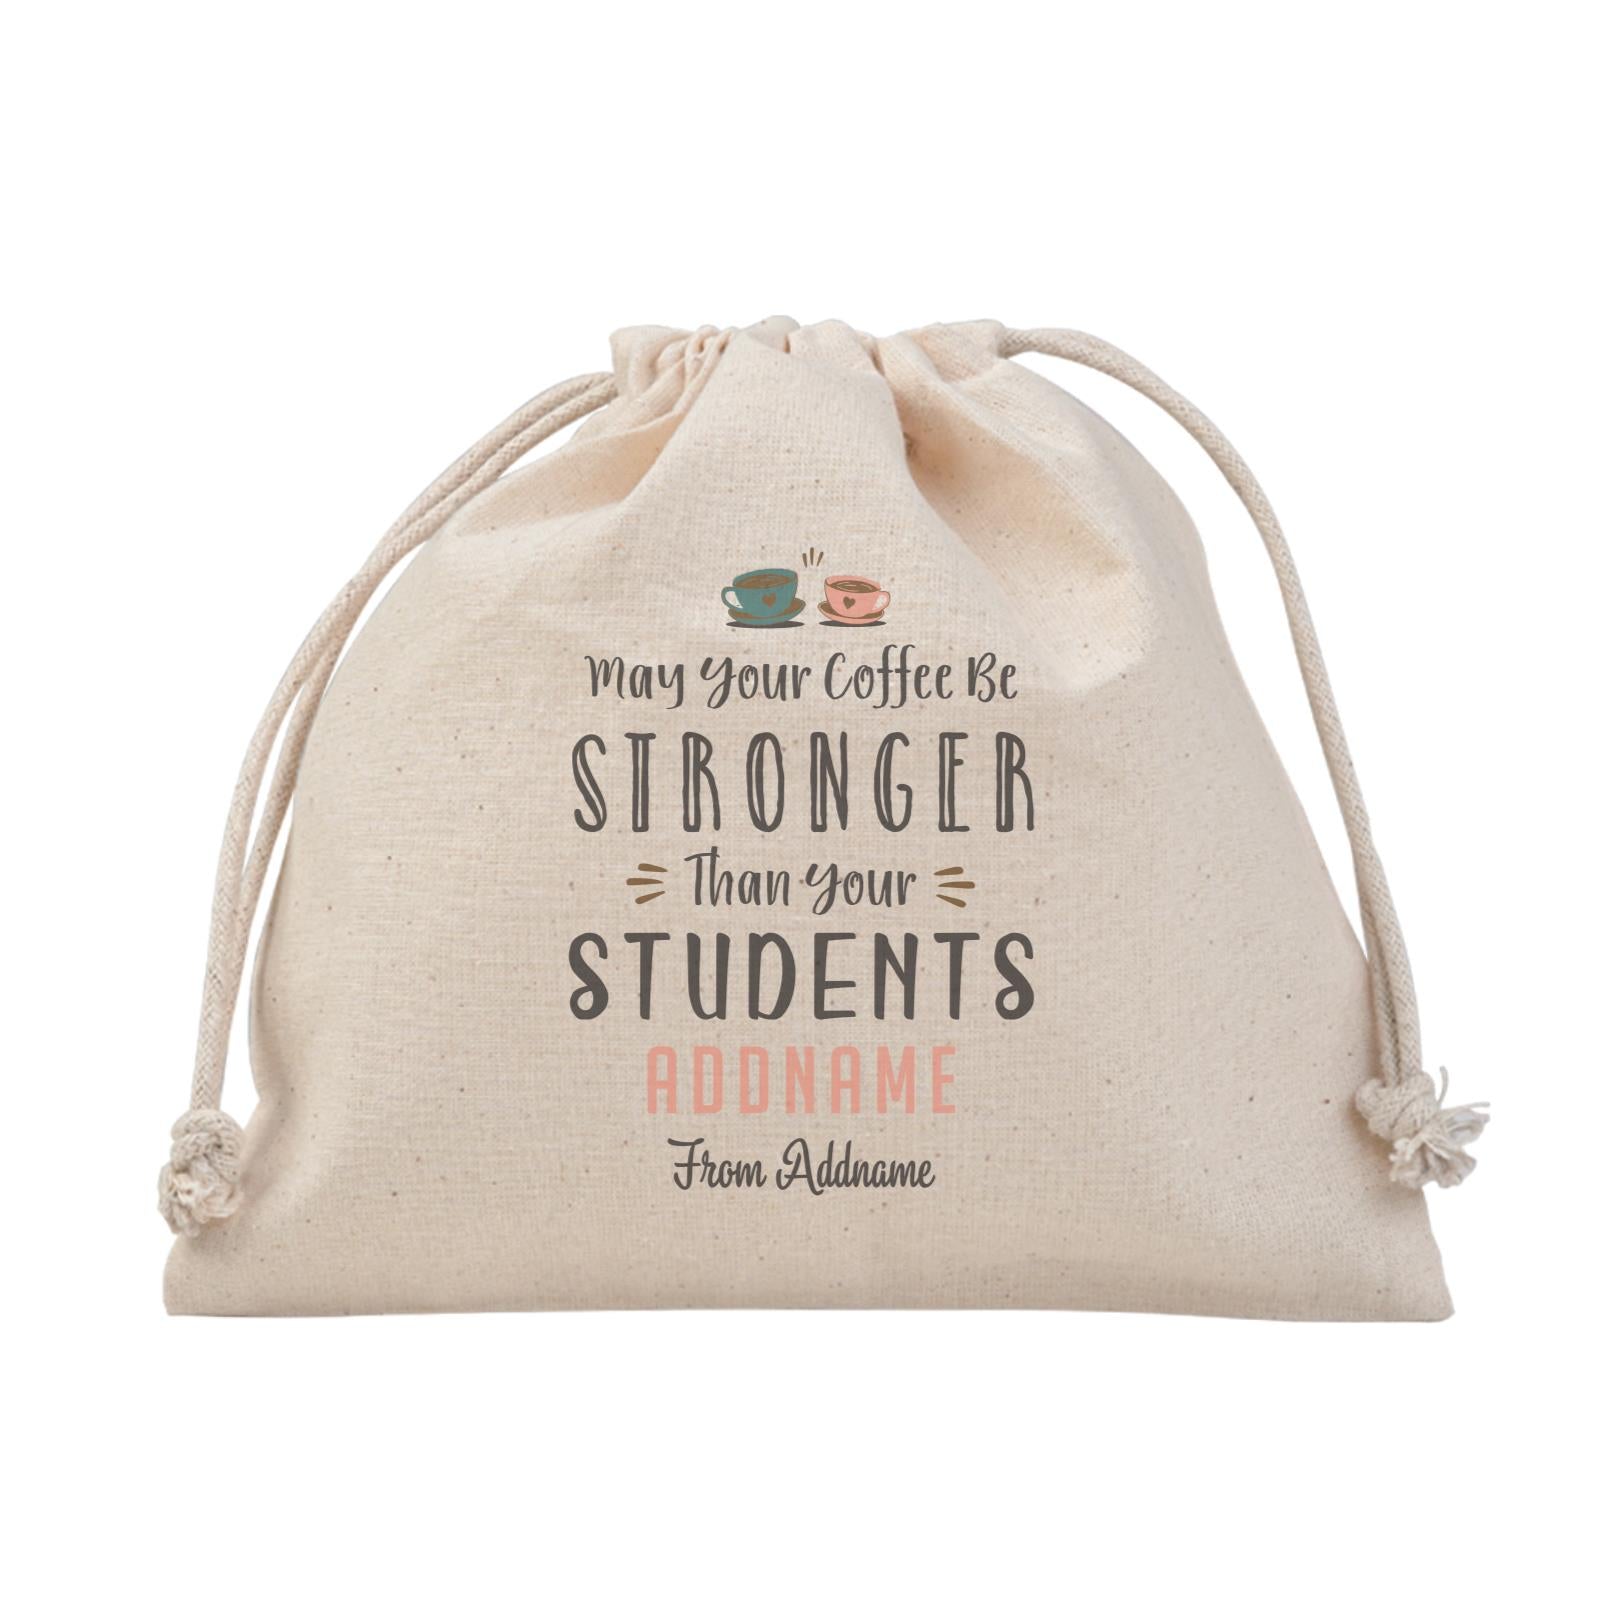 May Your Coffee Be Stronger Than Your Students Satchel